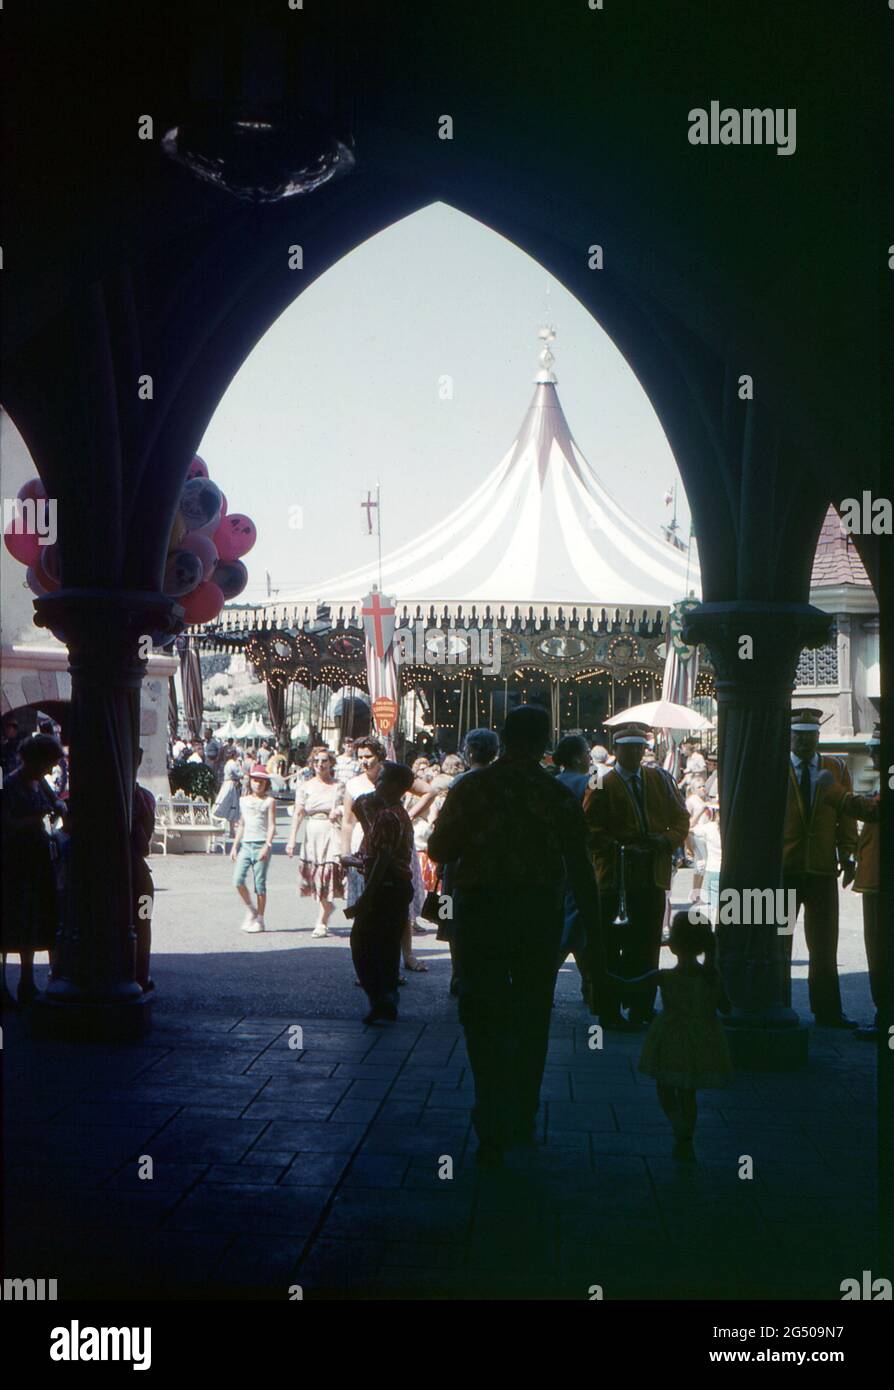 Disneyland, California, 1959. A busy scene showing a view of the King Arthur Carrousel from within Sleeping Beauty’s Castle, Fantasyland. Visitors are passing by and a balloon seller and Disneyland musicians are in the foreground. Stock Photo